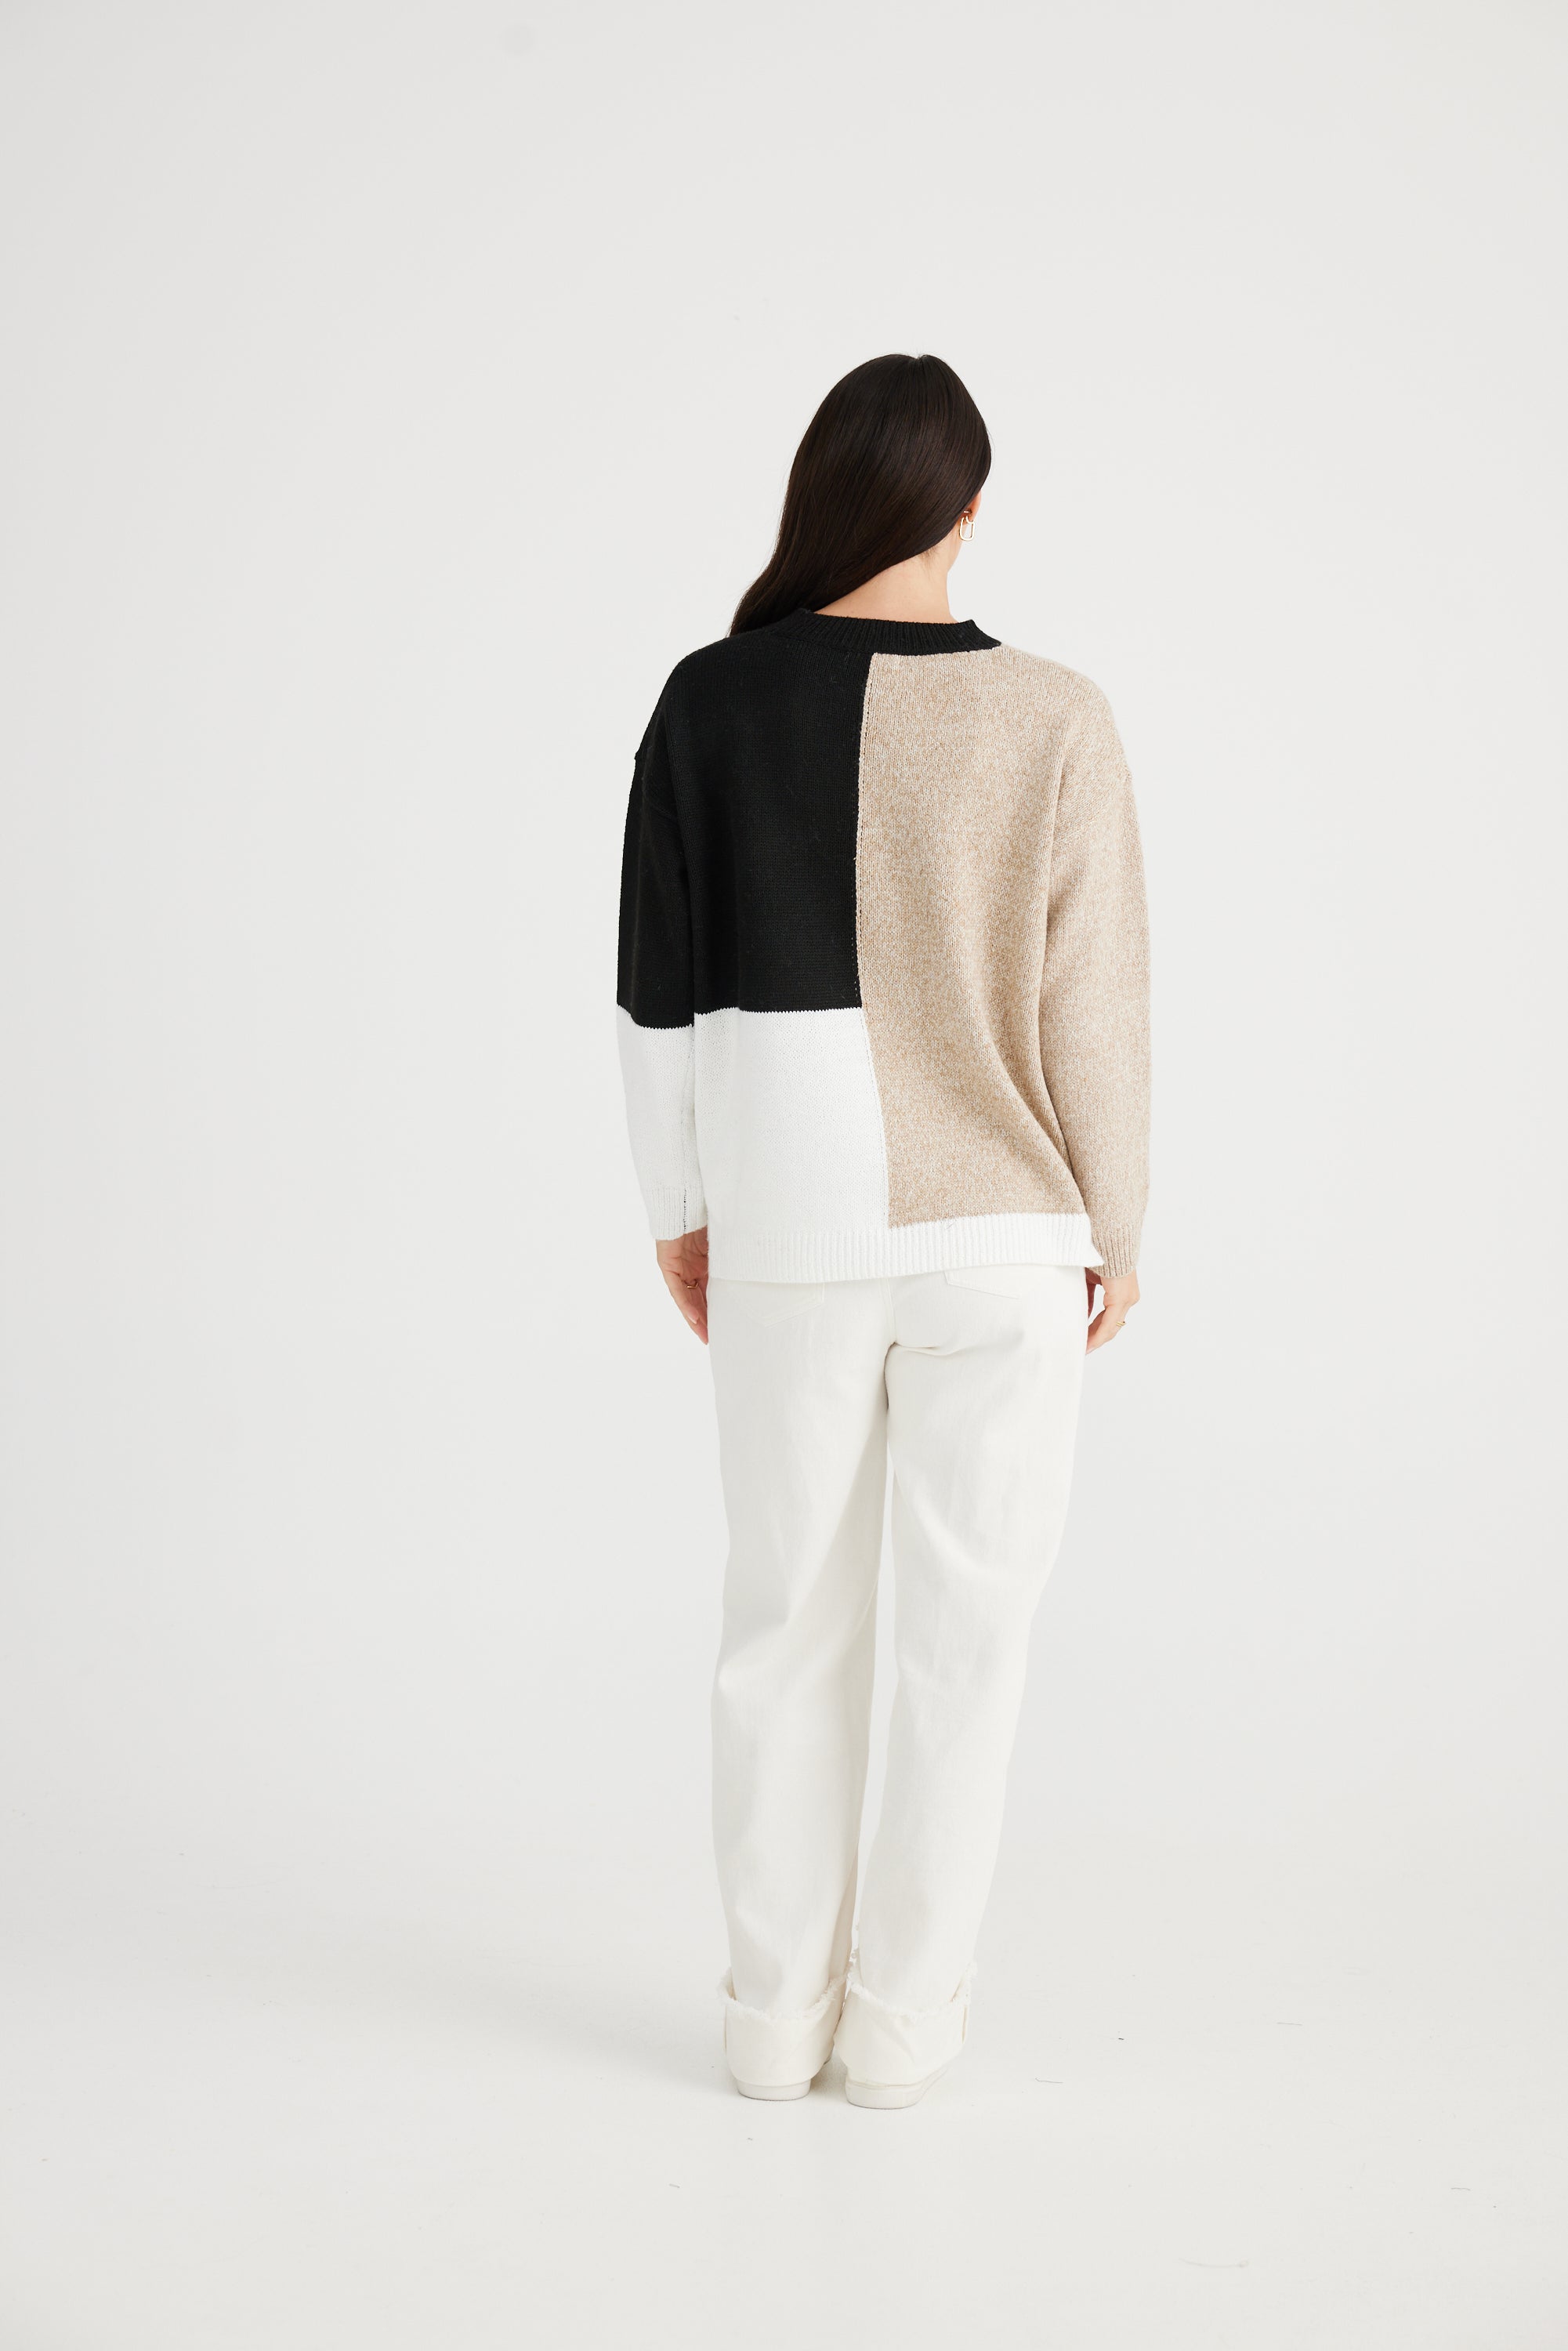 Harmony Knit - Natural-Knitwear & Jumpers-Brave & True-The Bay Room